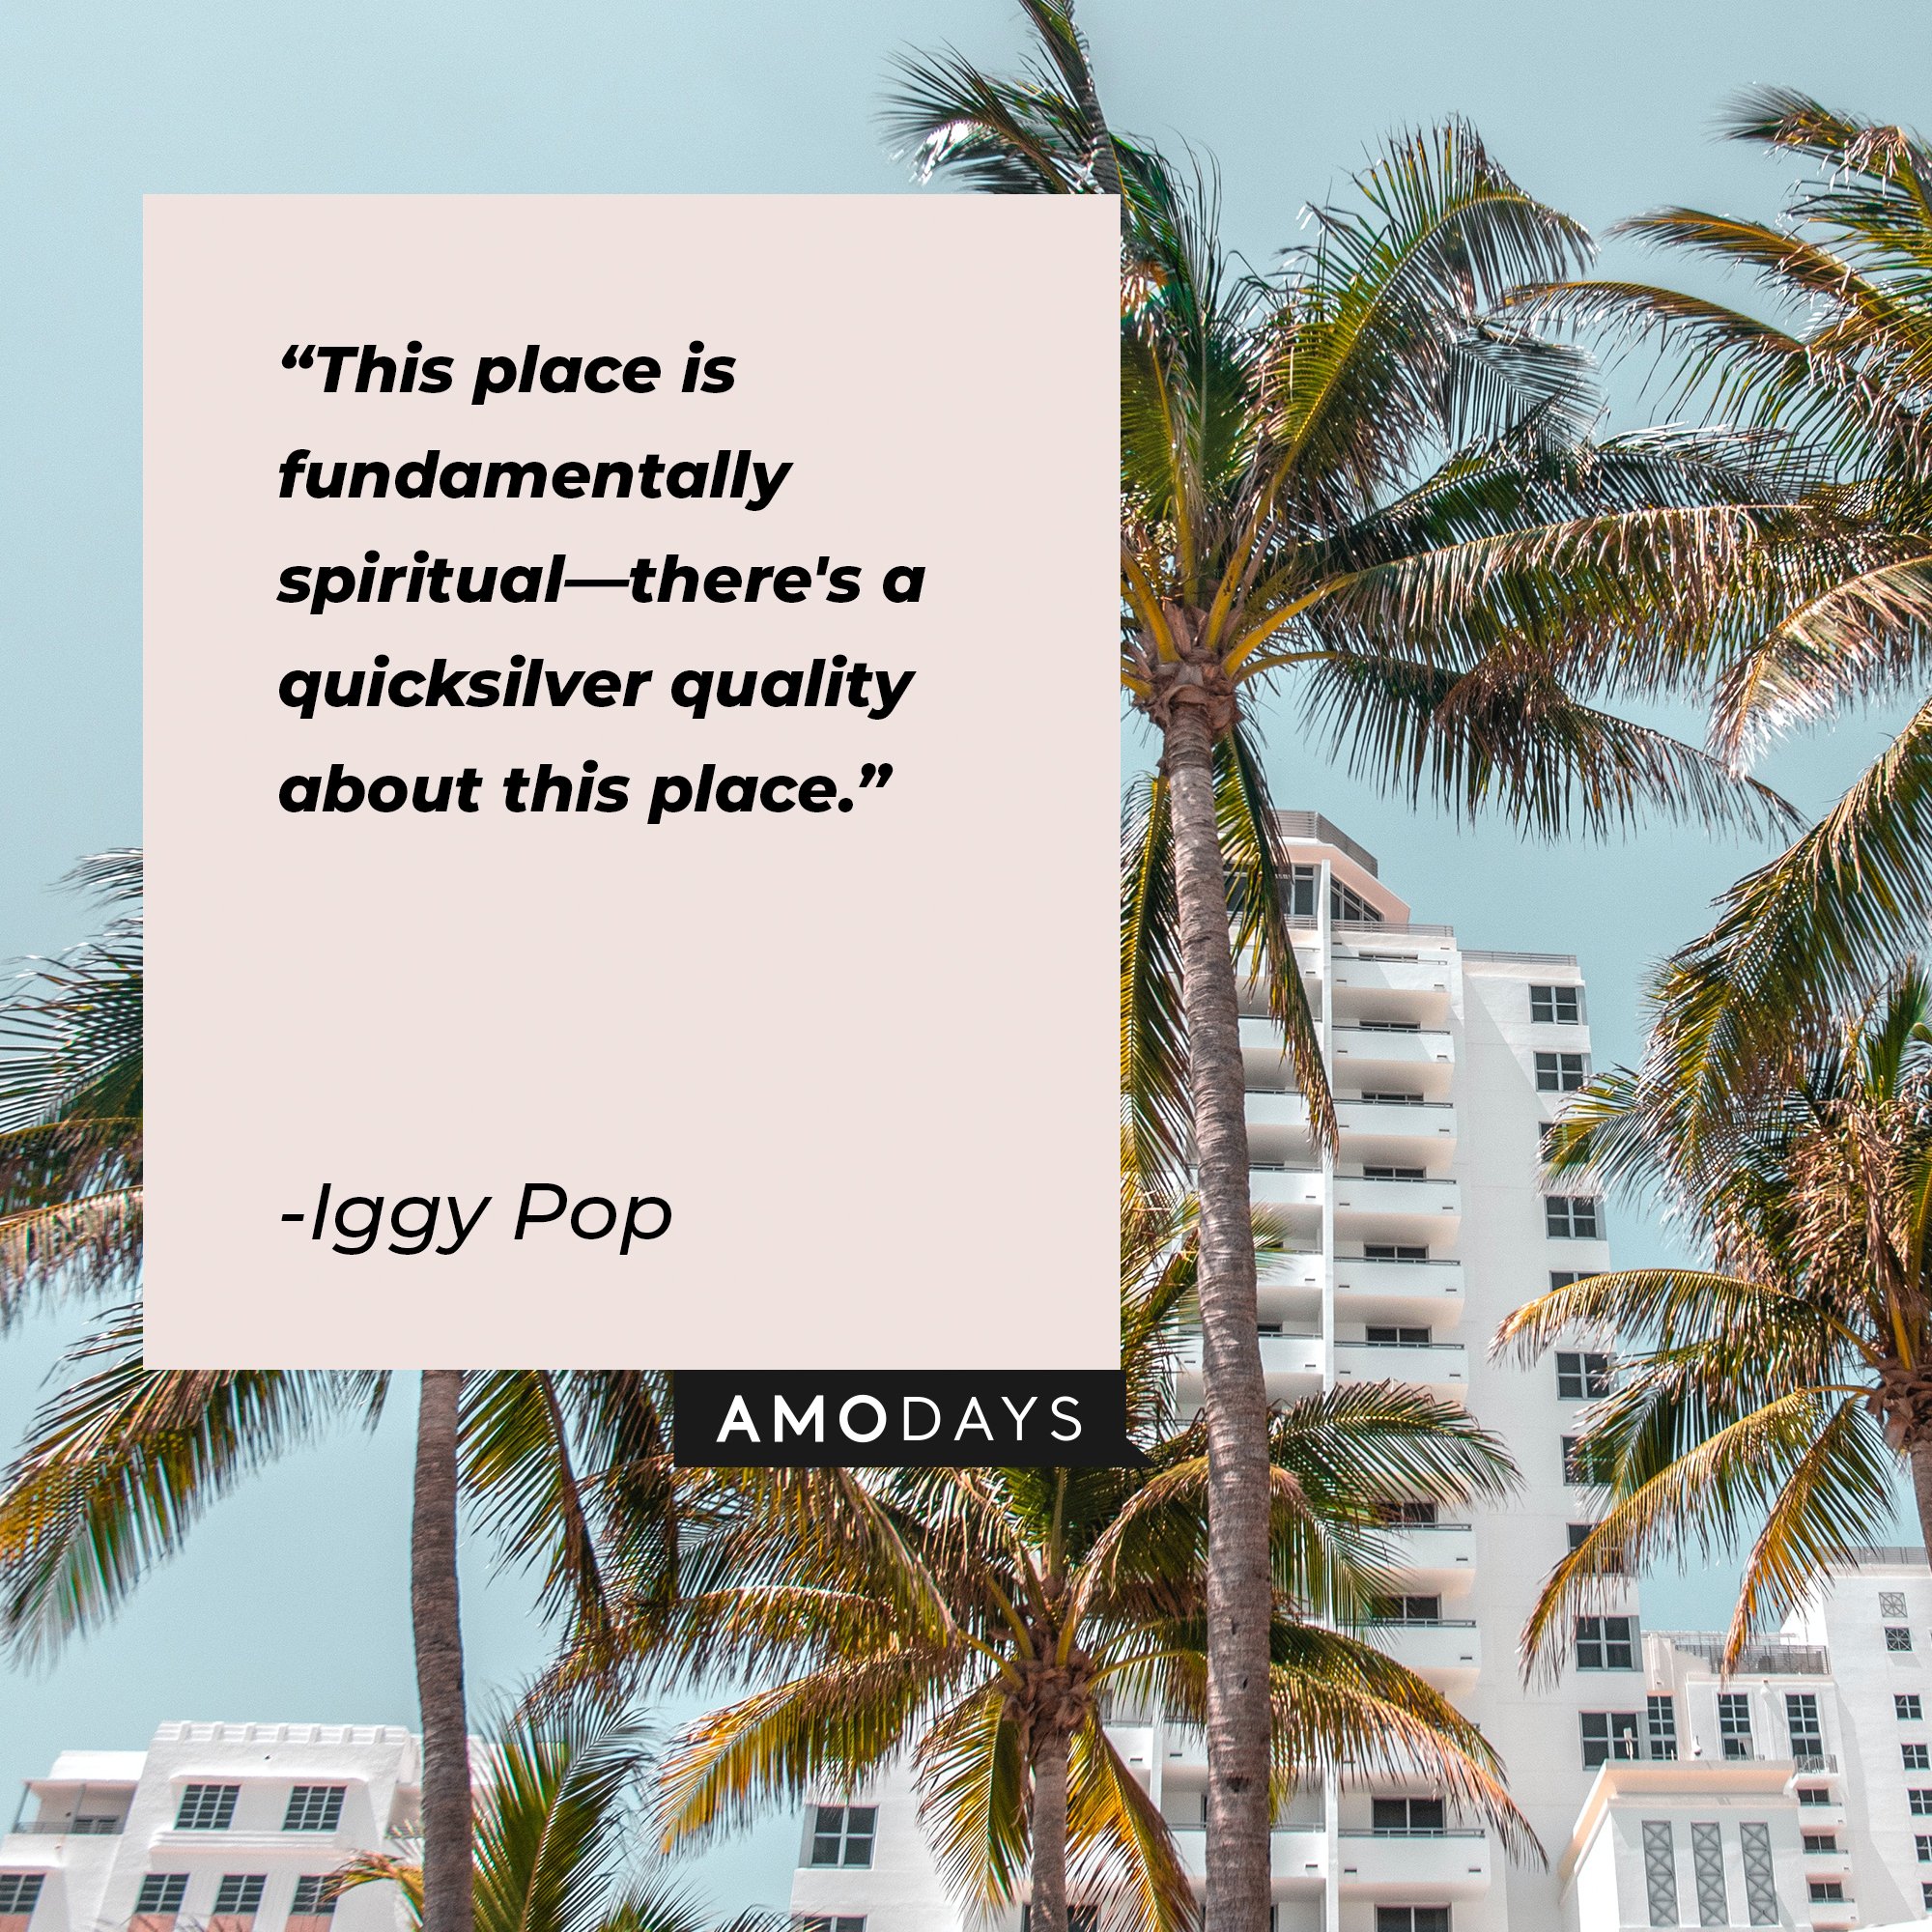 Iggy Pop’s quote: "This place is fundamentally spiritual—there's a quicksilver quality about this place." | Image: AmoDays